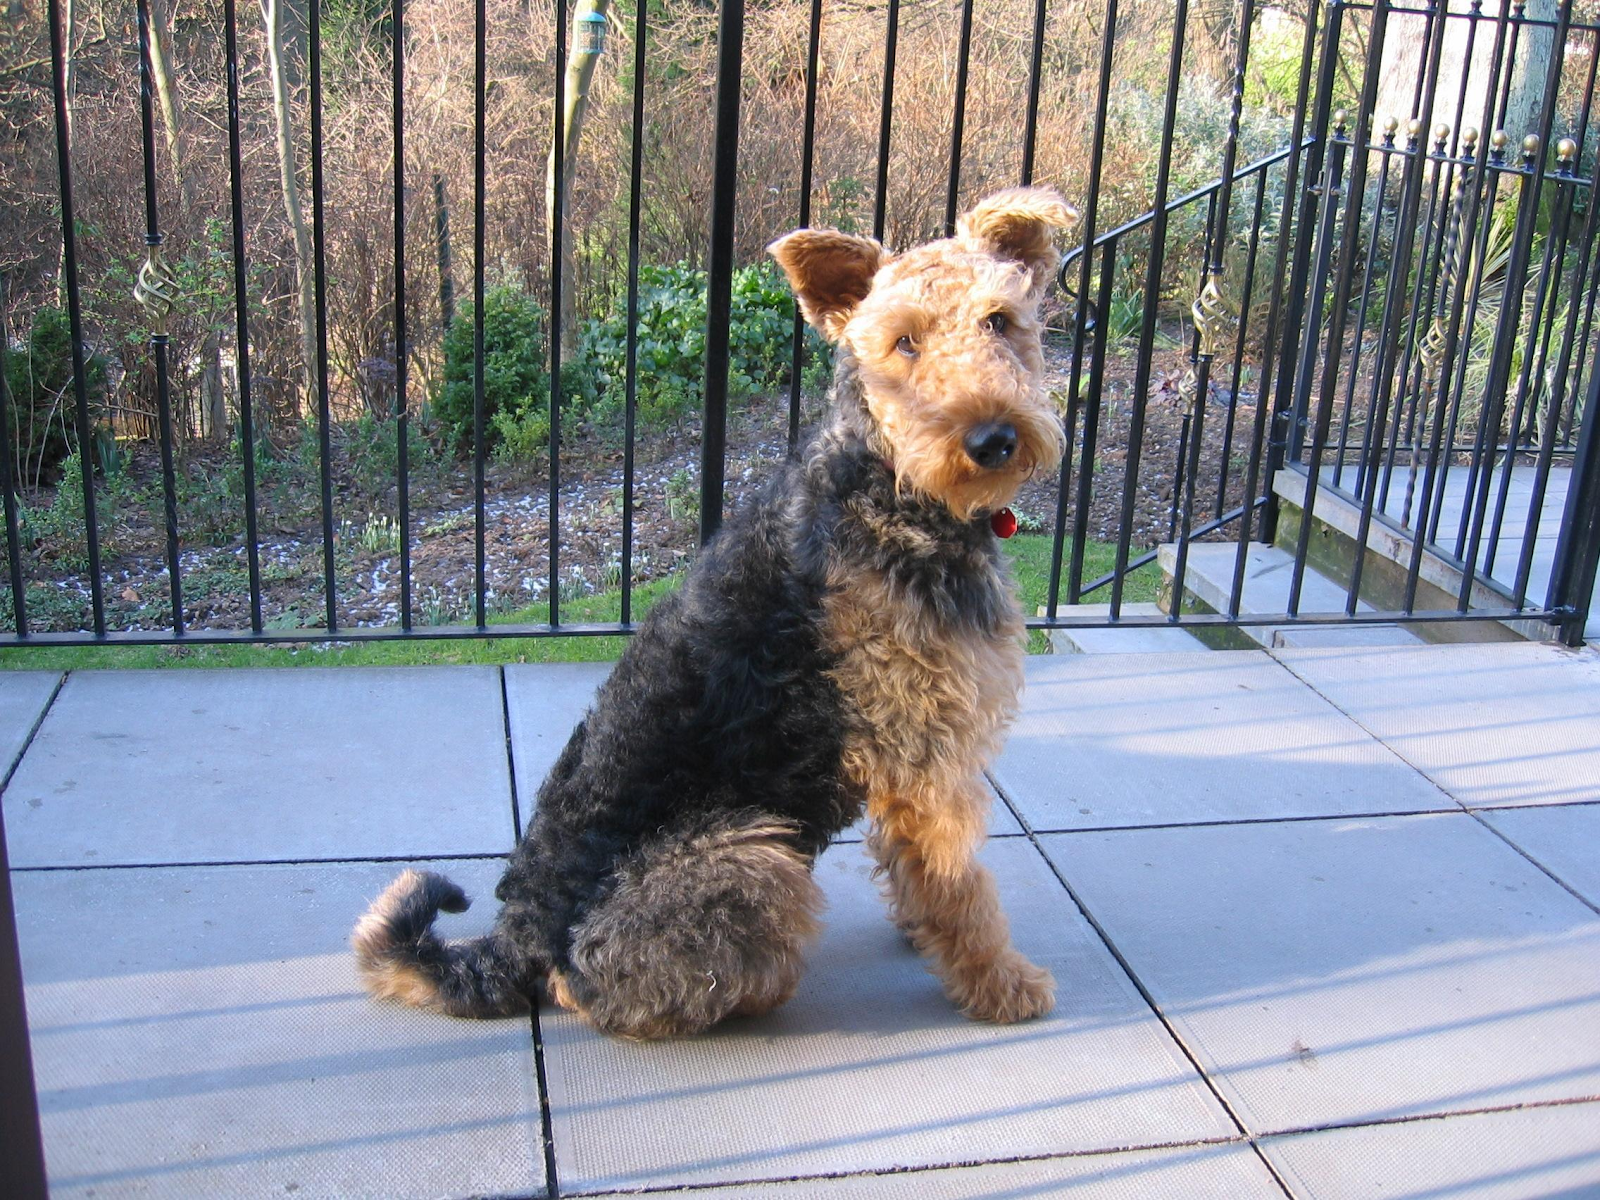 do airedales like water